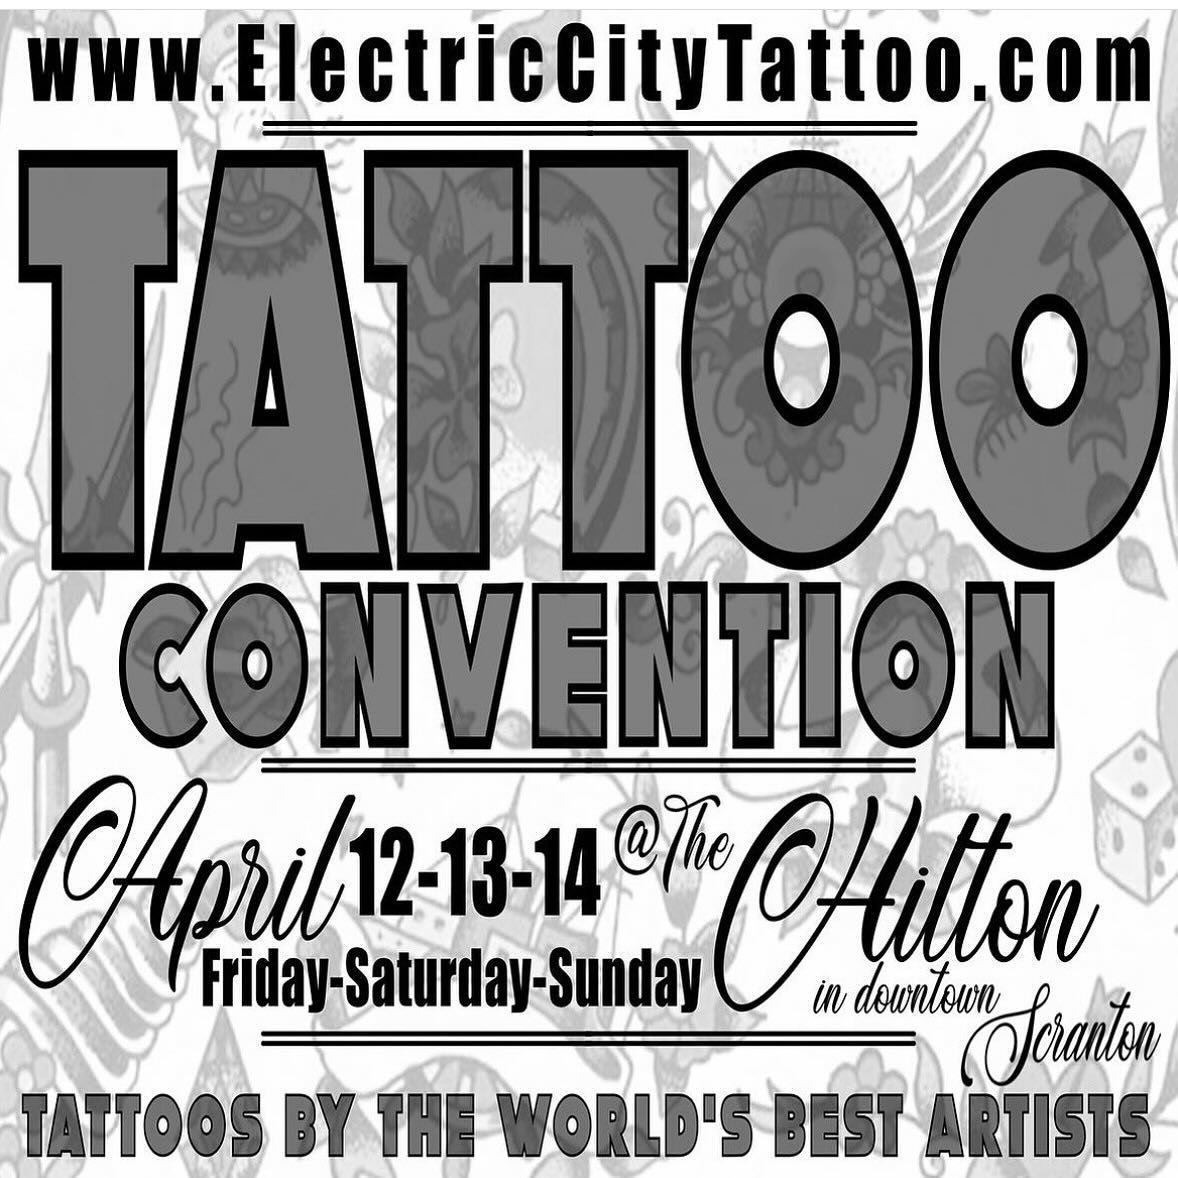 The shop will be closed Thursday 4/11/24-Monday 4/15/24. We will be spending the weekend tattooing at the Electric City Tattoo @scranton_tatcon Convention. 

Normal business hours will resume as scheduled on Tuesday 4/16/24. 

Thanks for your continu